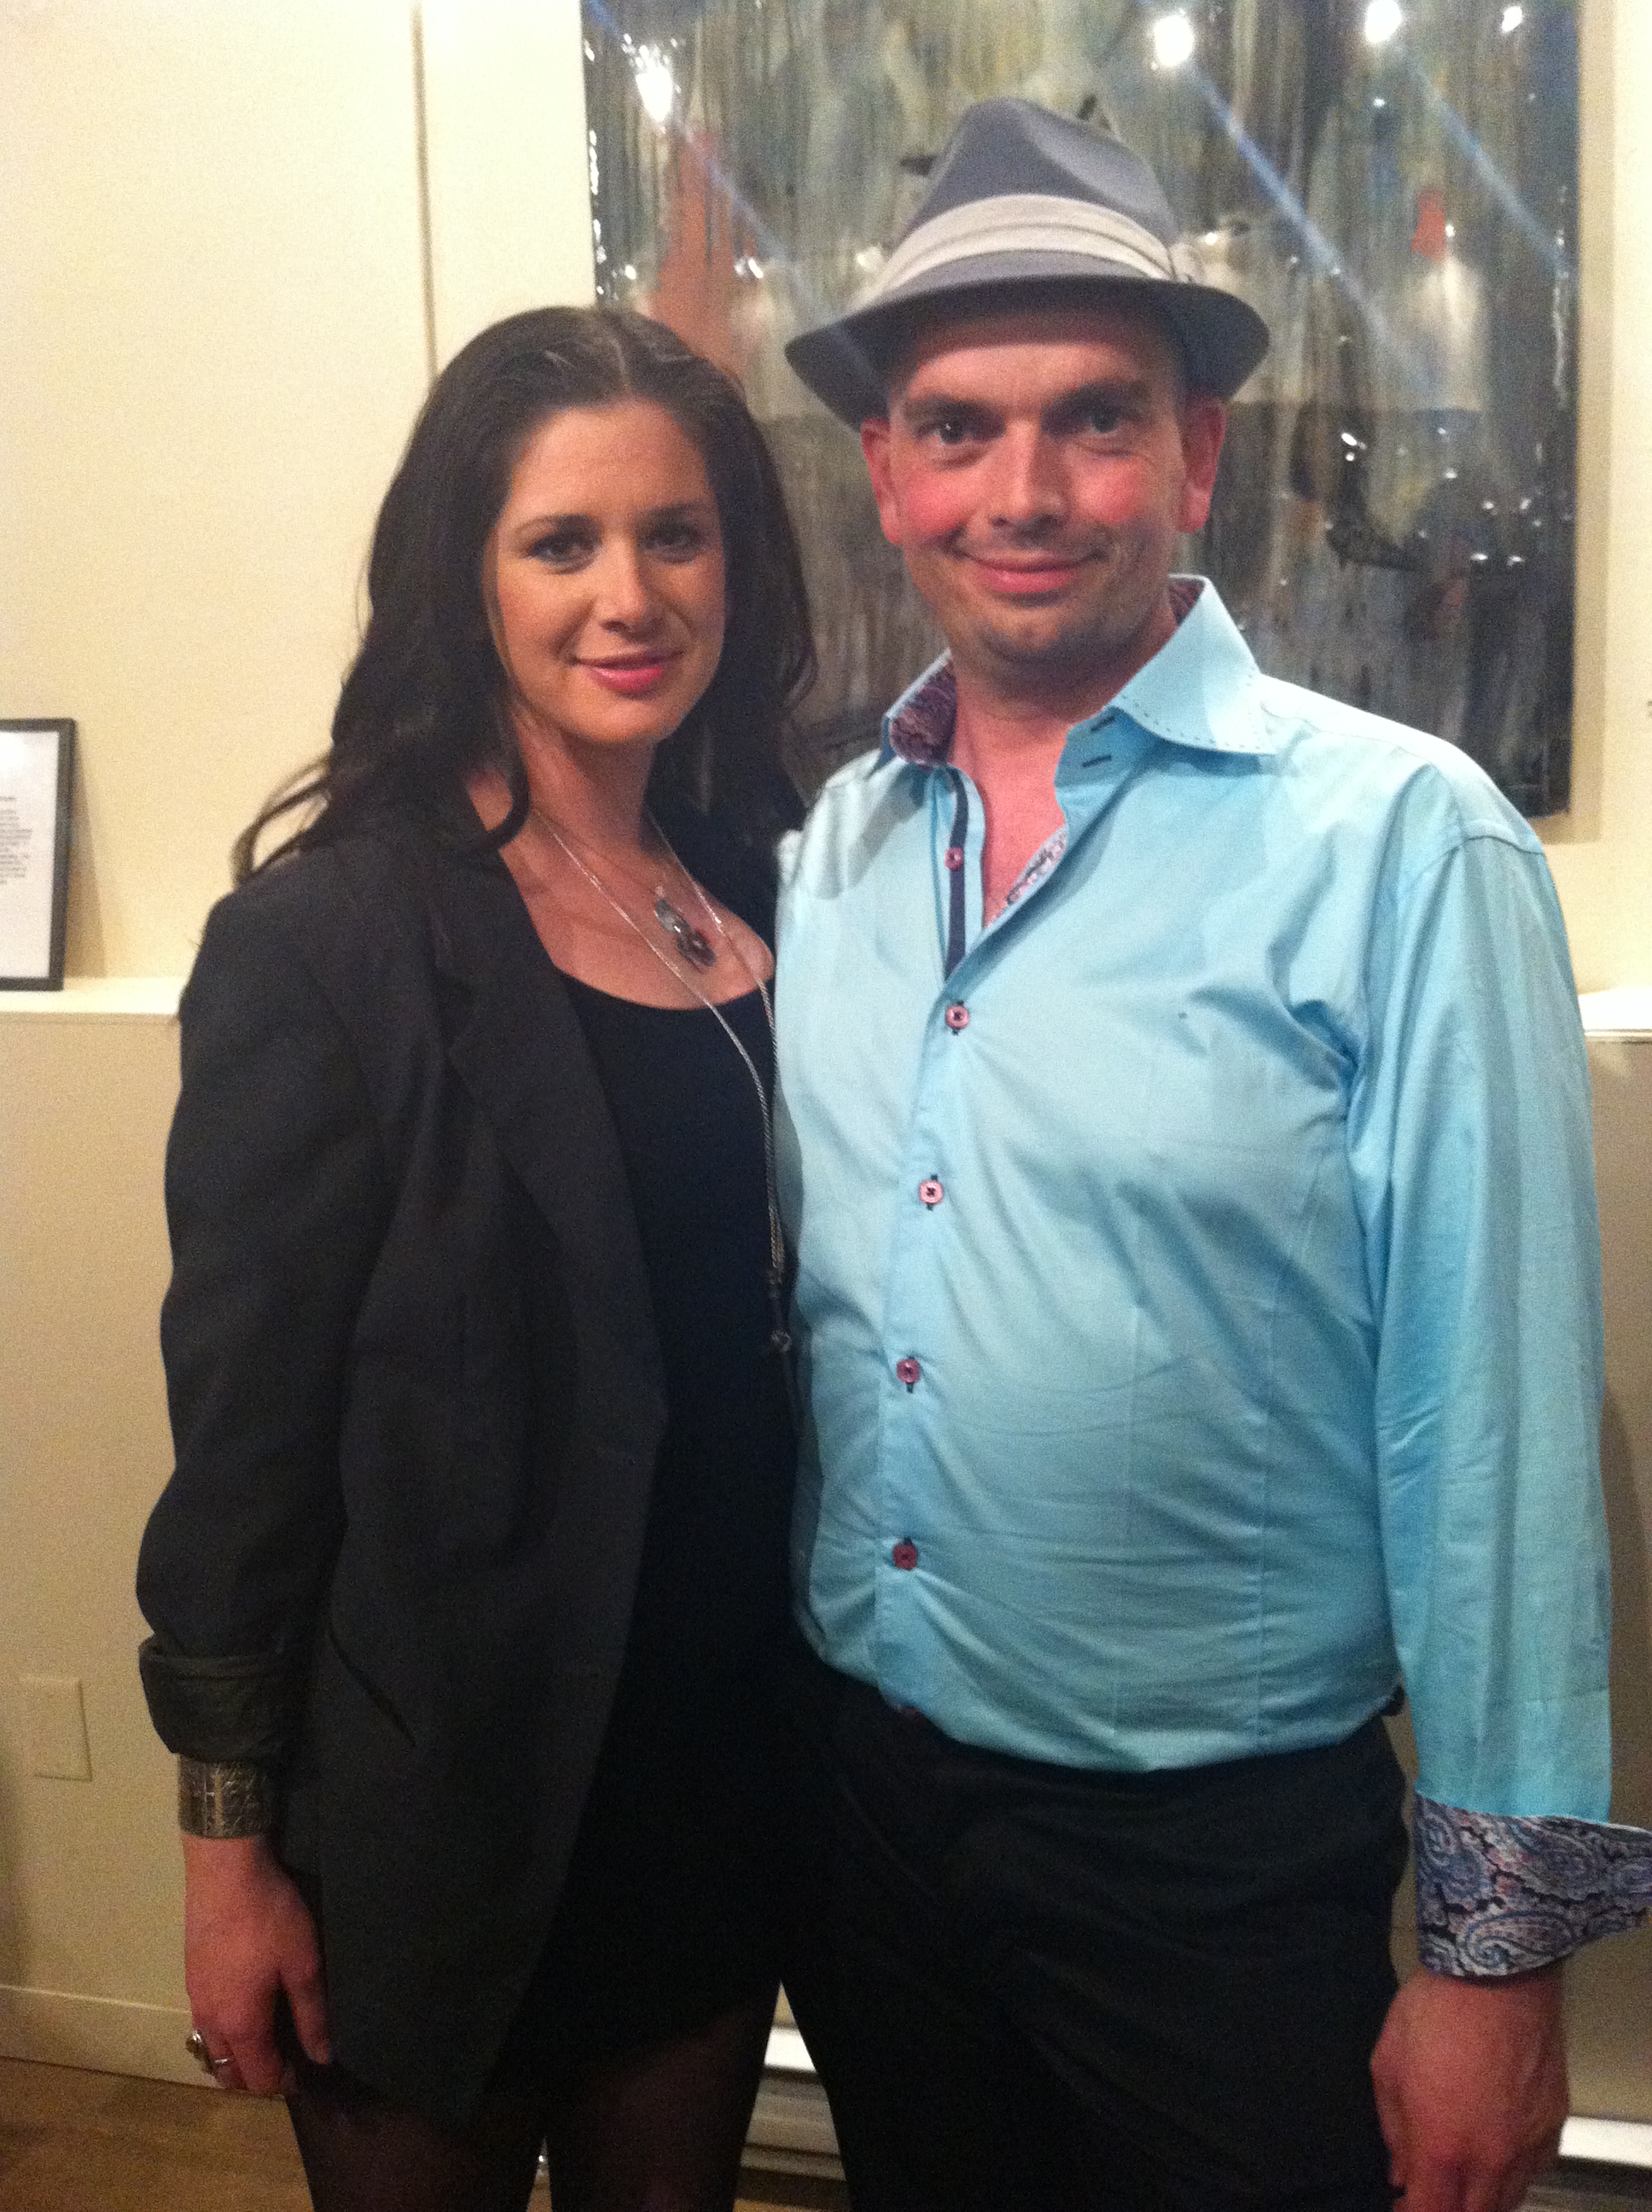 Opening night @ Vancouver Fashion Week with Peter New